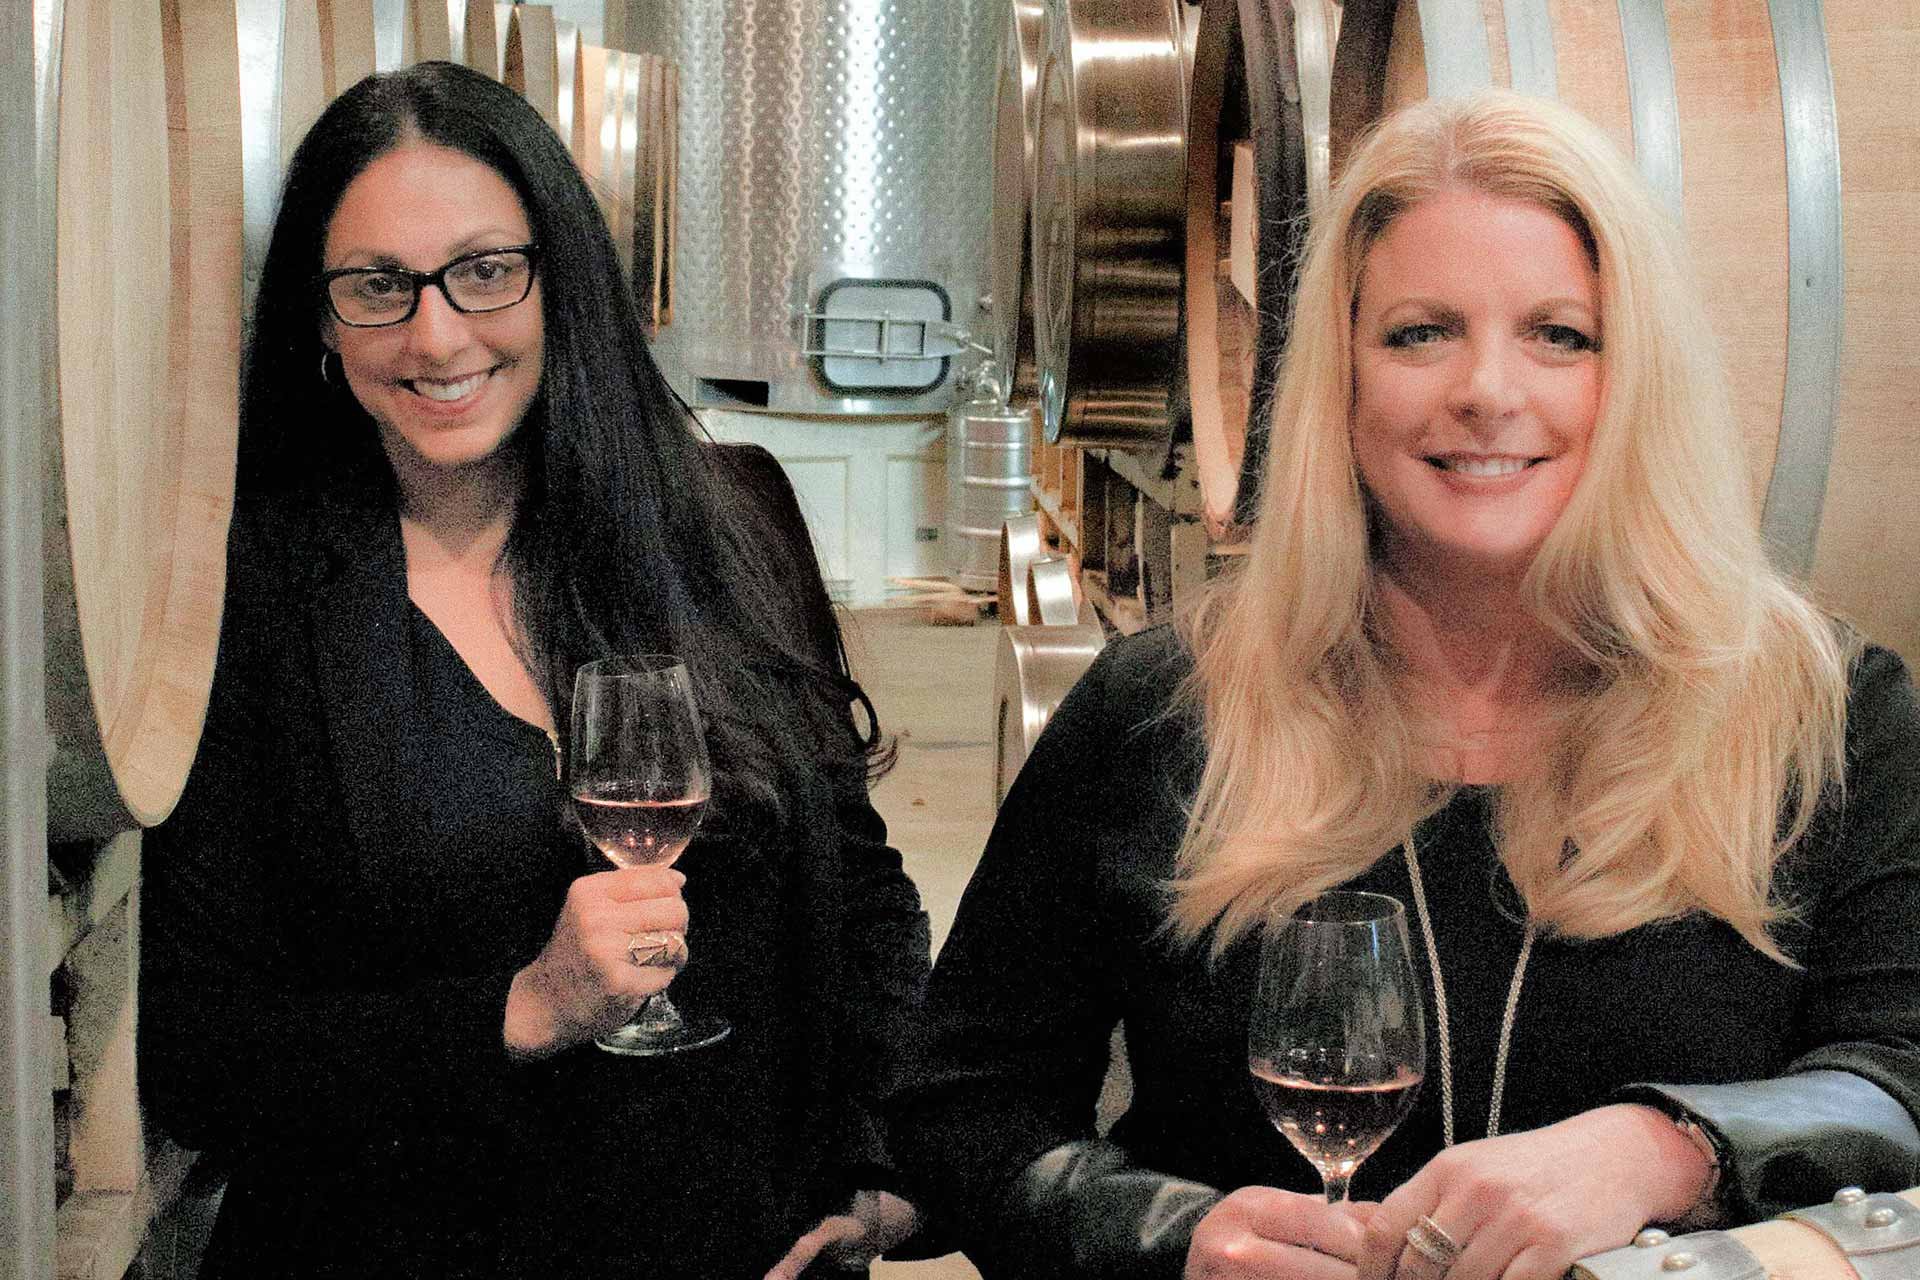 Co-founders of House of Saka,&nbsp;Cynthia Salarizadeh (left) with expertise in the cannabis business&nbsp;and Tracey Mason (right) with experience in the wine-trade.